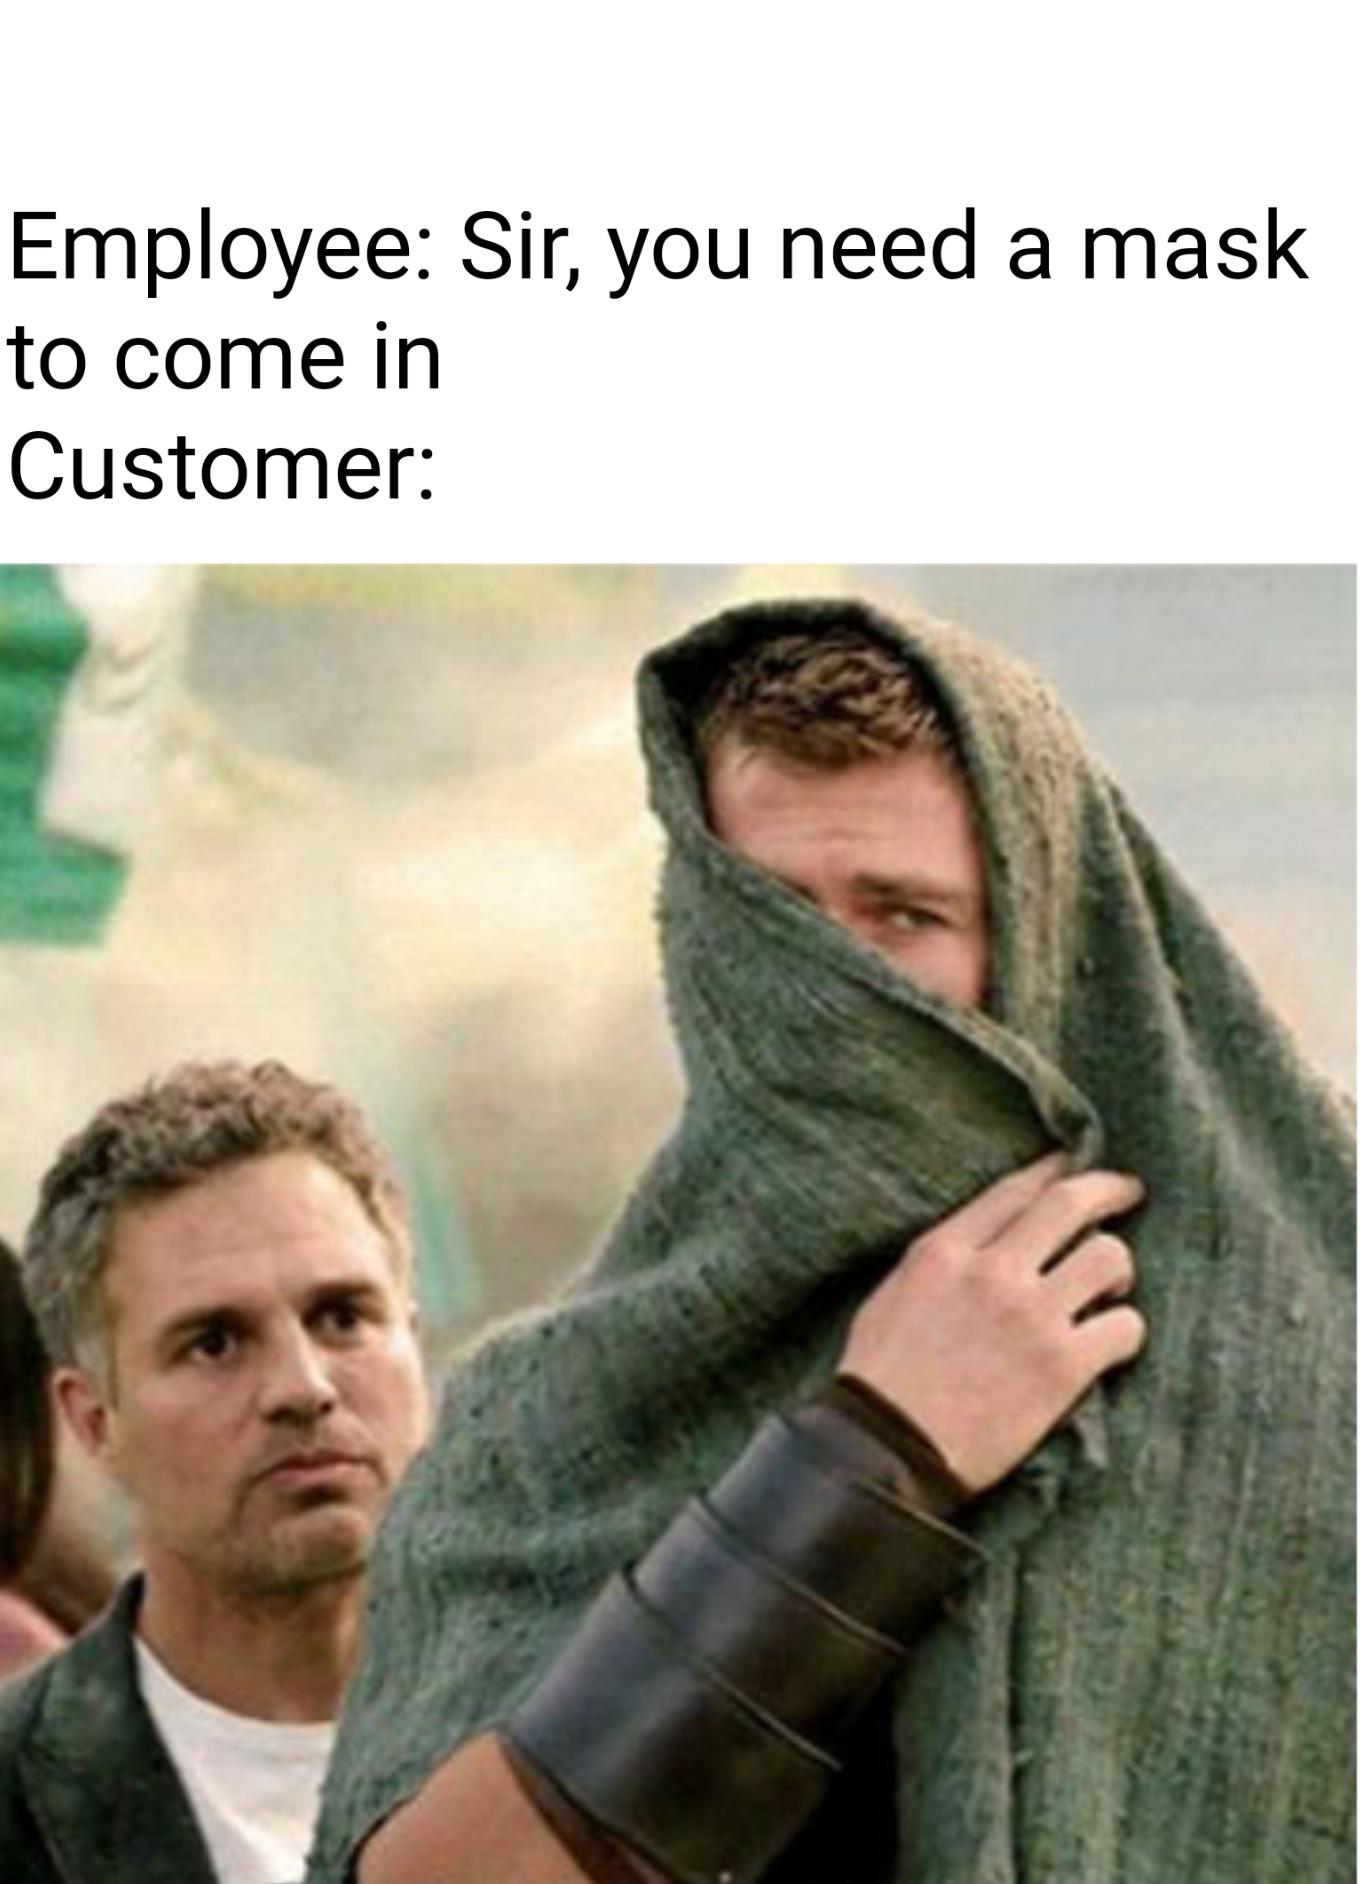 thor disguise meme - Employee Sir, you need a mask to come in Customer